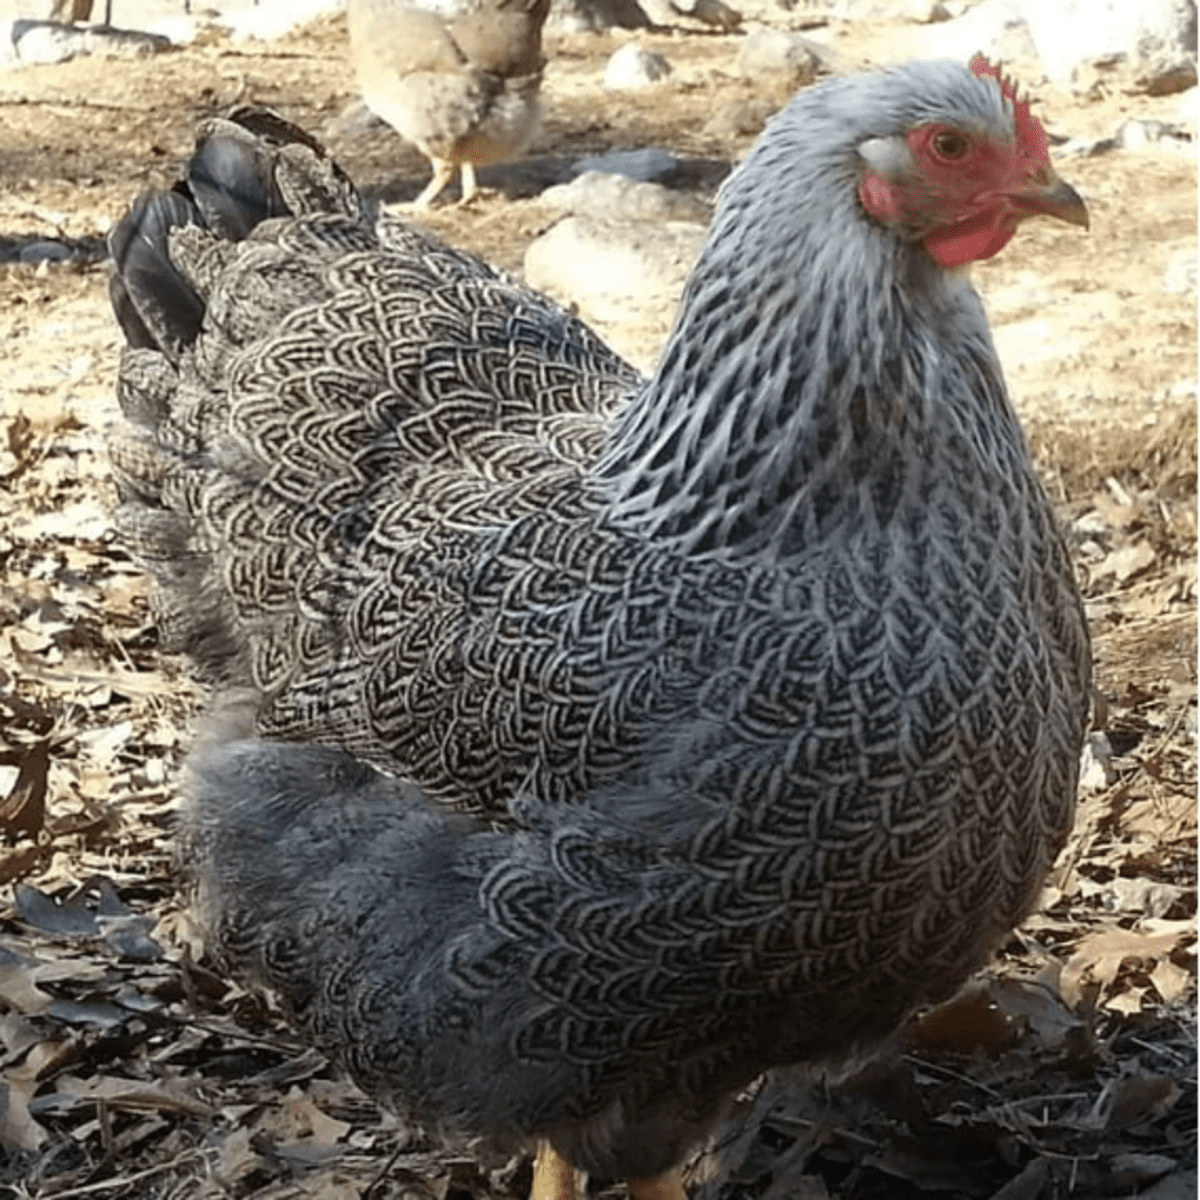 Short-legged chickens creepers, their characteristics